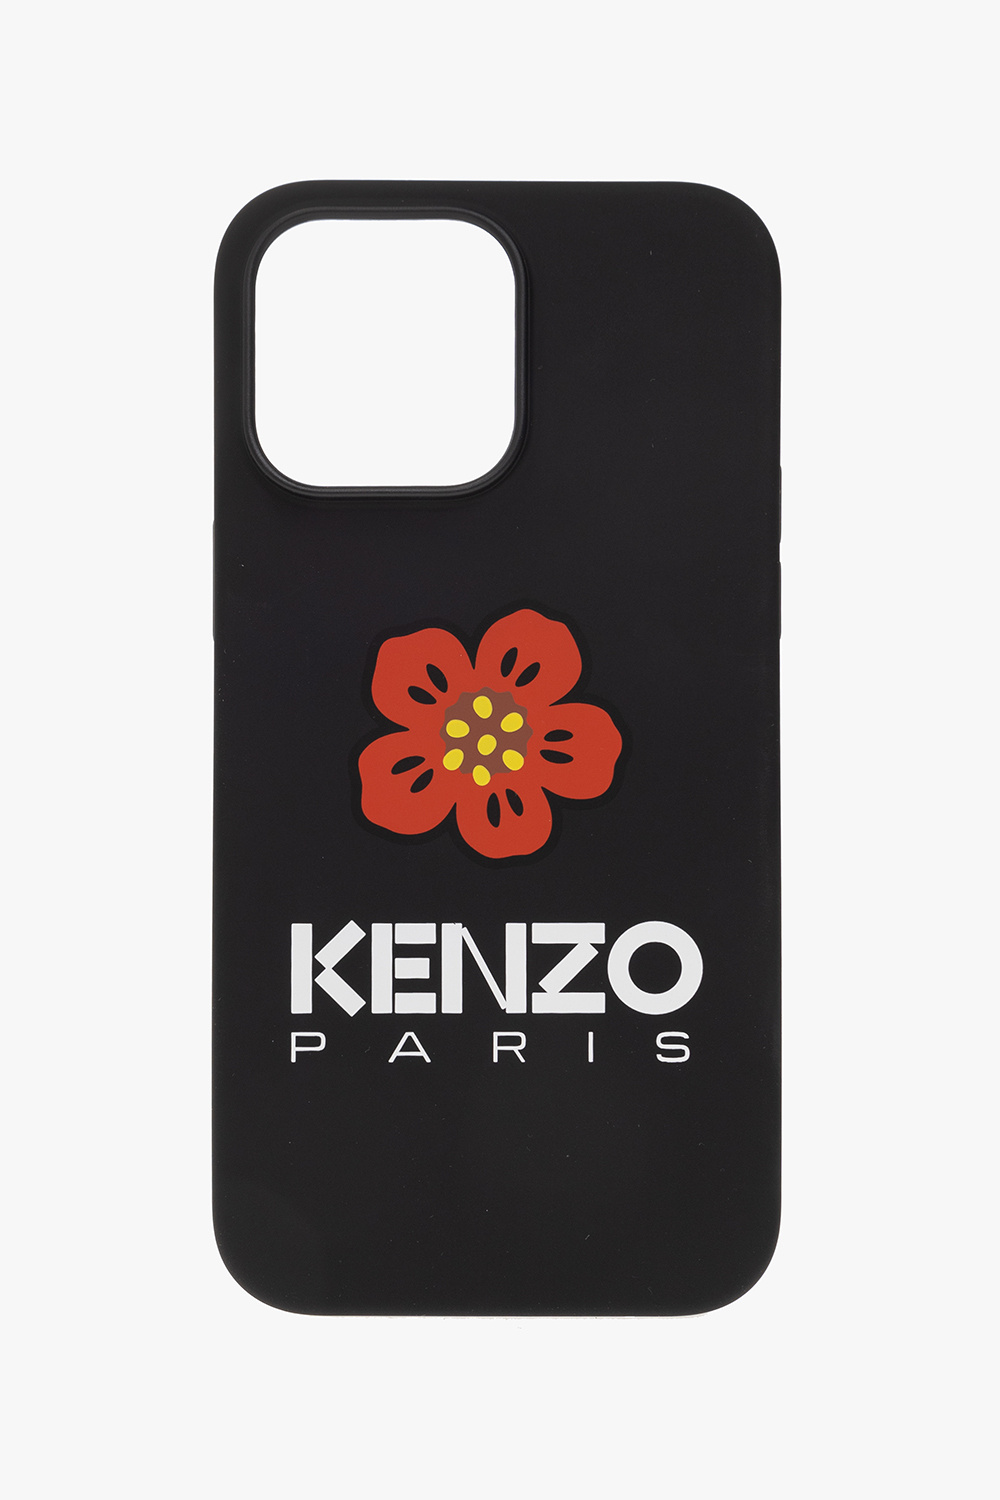 Kenzo Recommended for you